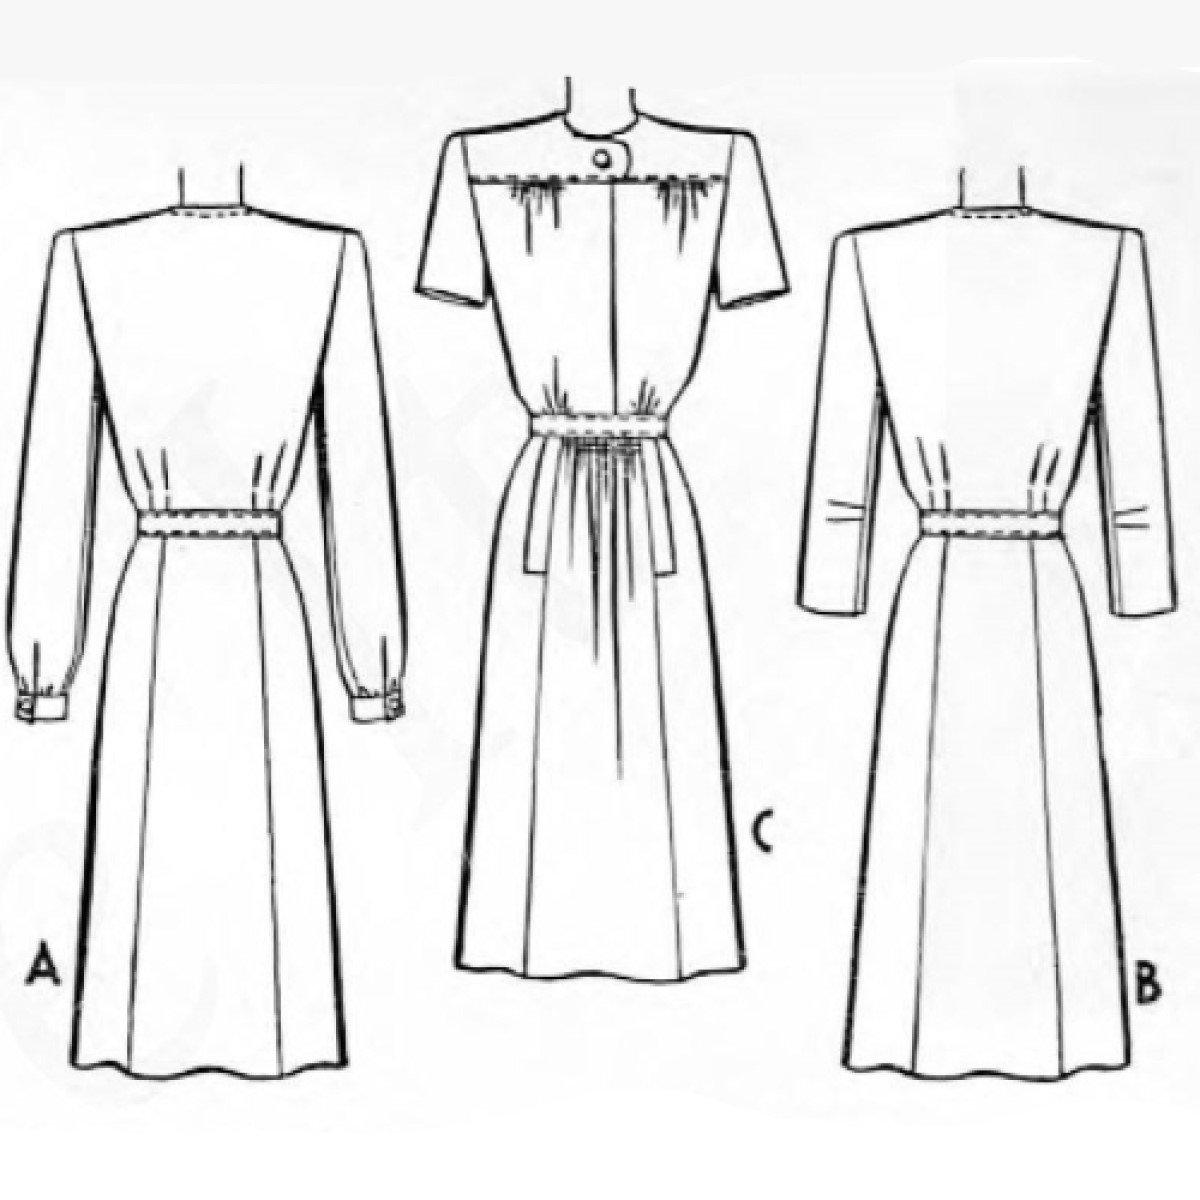 Line drawings of dress with long or short sleeves. Front and back views